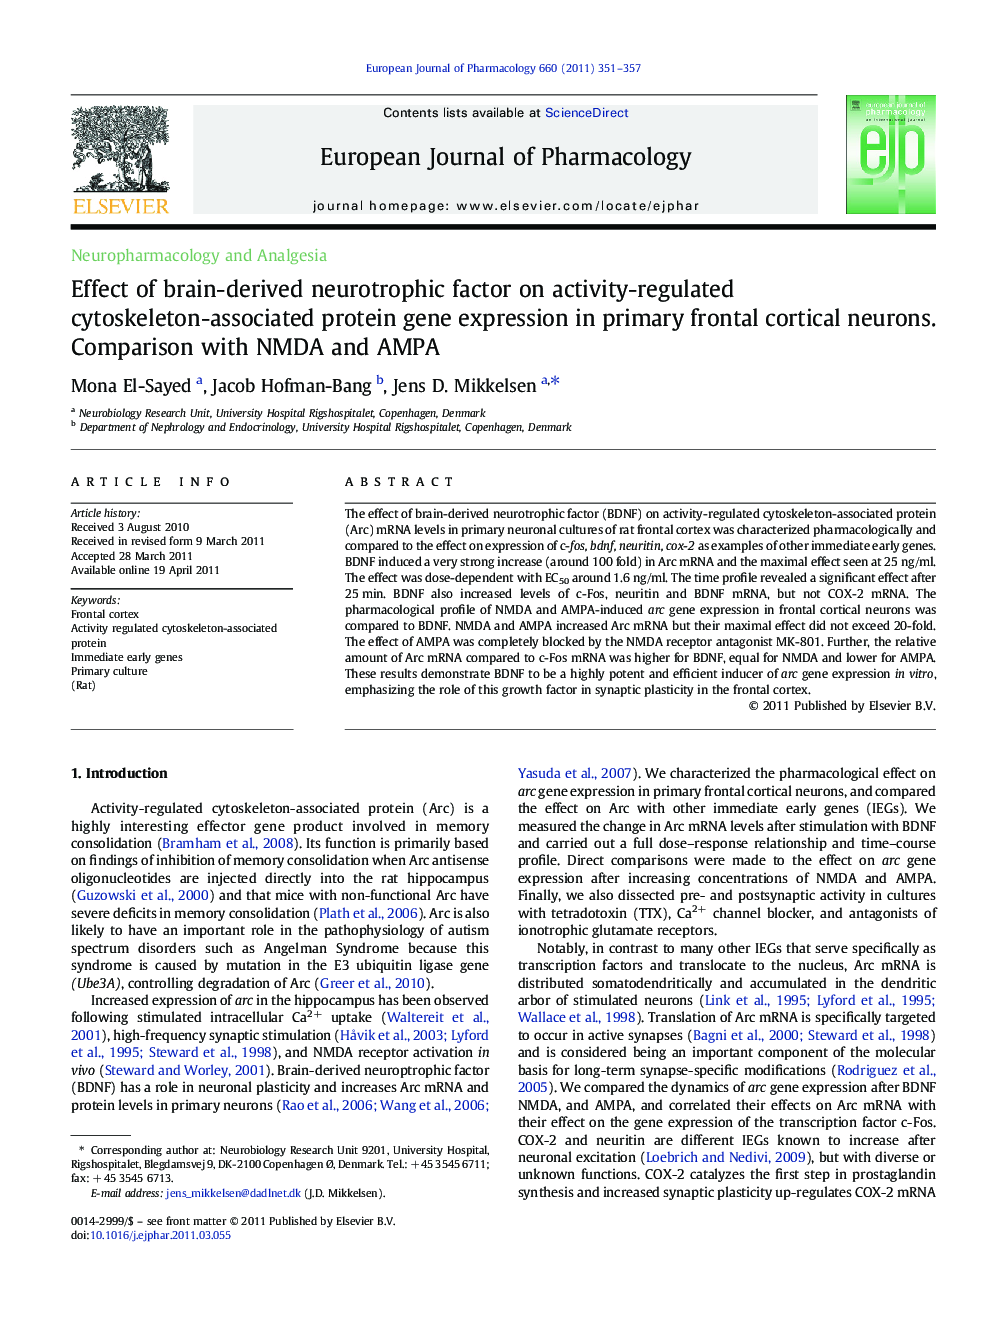 Effect of brain-derived neurotrophic factor on activity-regulated cytoskeleton-associated protein gene expression in primary frontal cortical neurons. Comparison with NMDA and AMPA